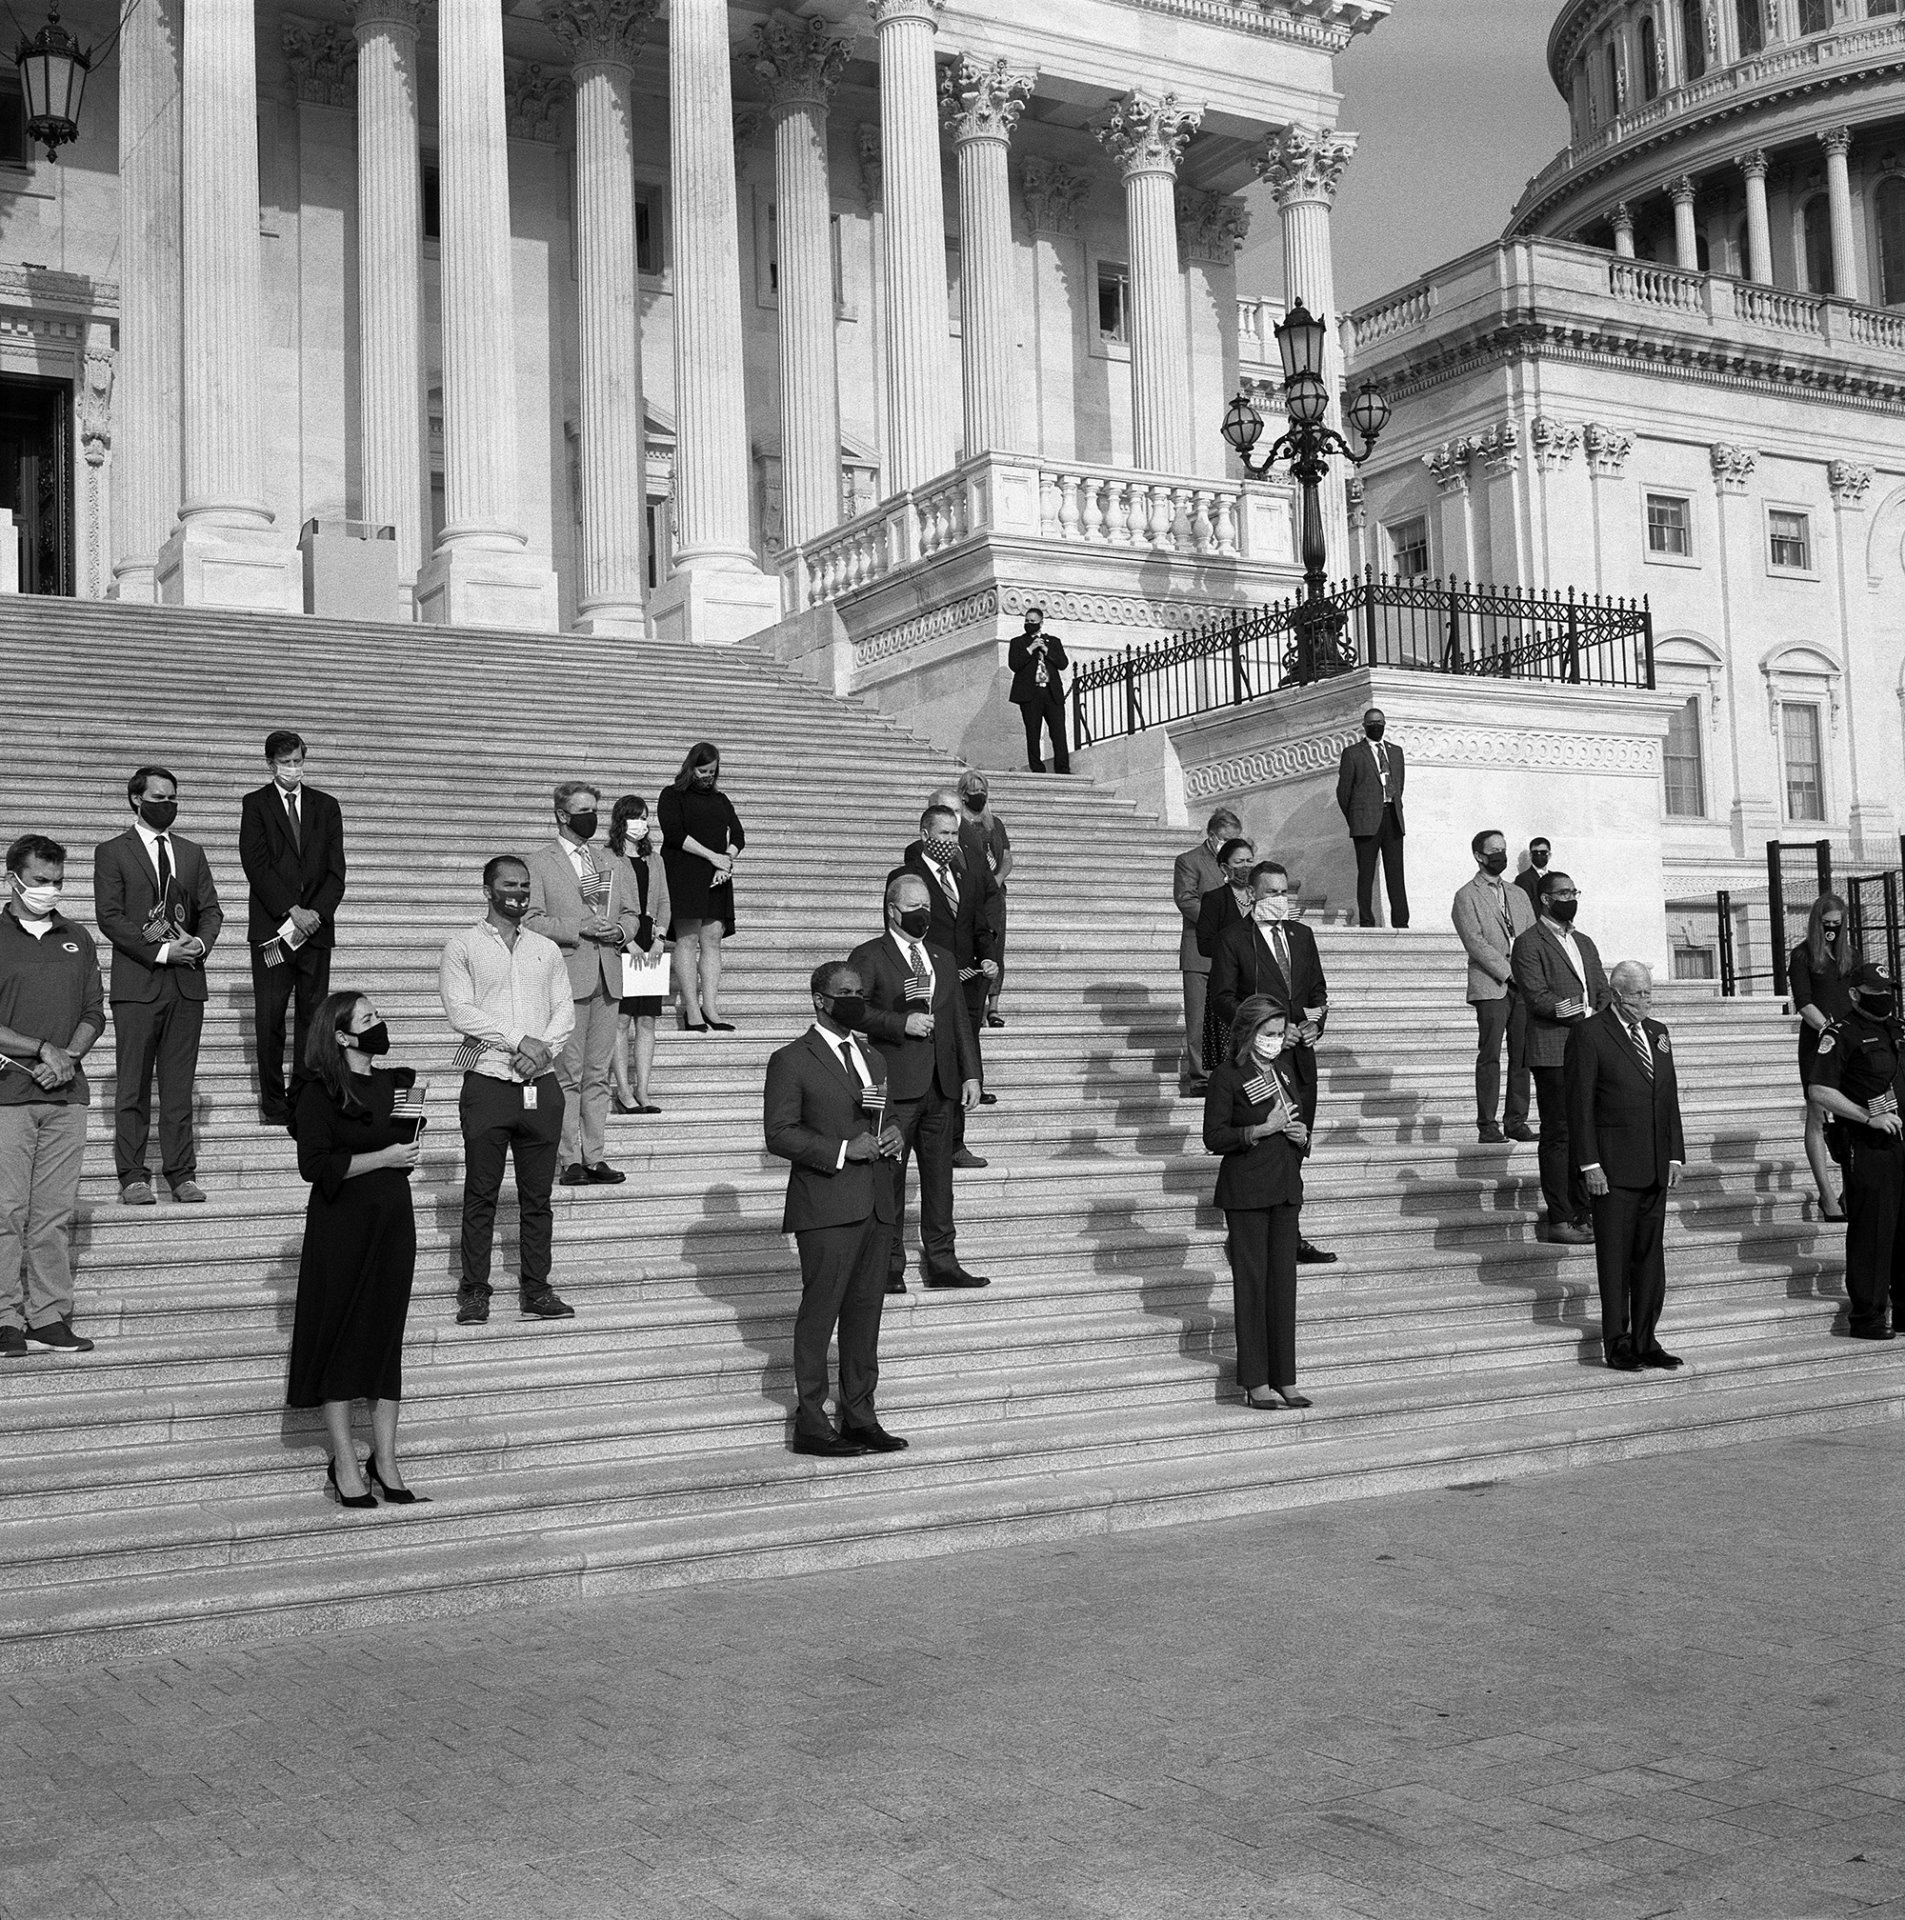 Speaker Nancy Pelosi, House Majority Leader Steny Hoyer, together with other Democrat representatives and aides participate in a ceremony on the steps of the Capitol, in Washington DC, USA, on 11 September 2020, to commemorate the 9/11 terrorist attacks.